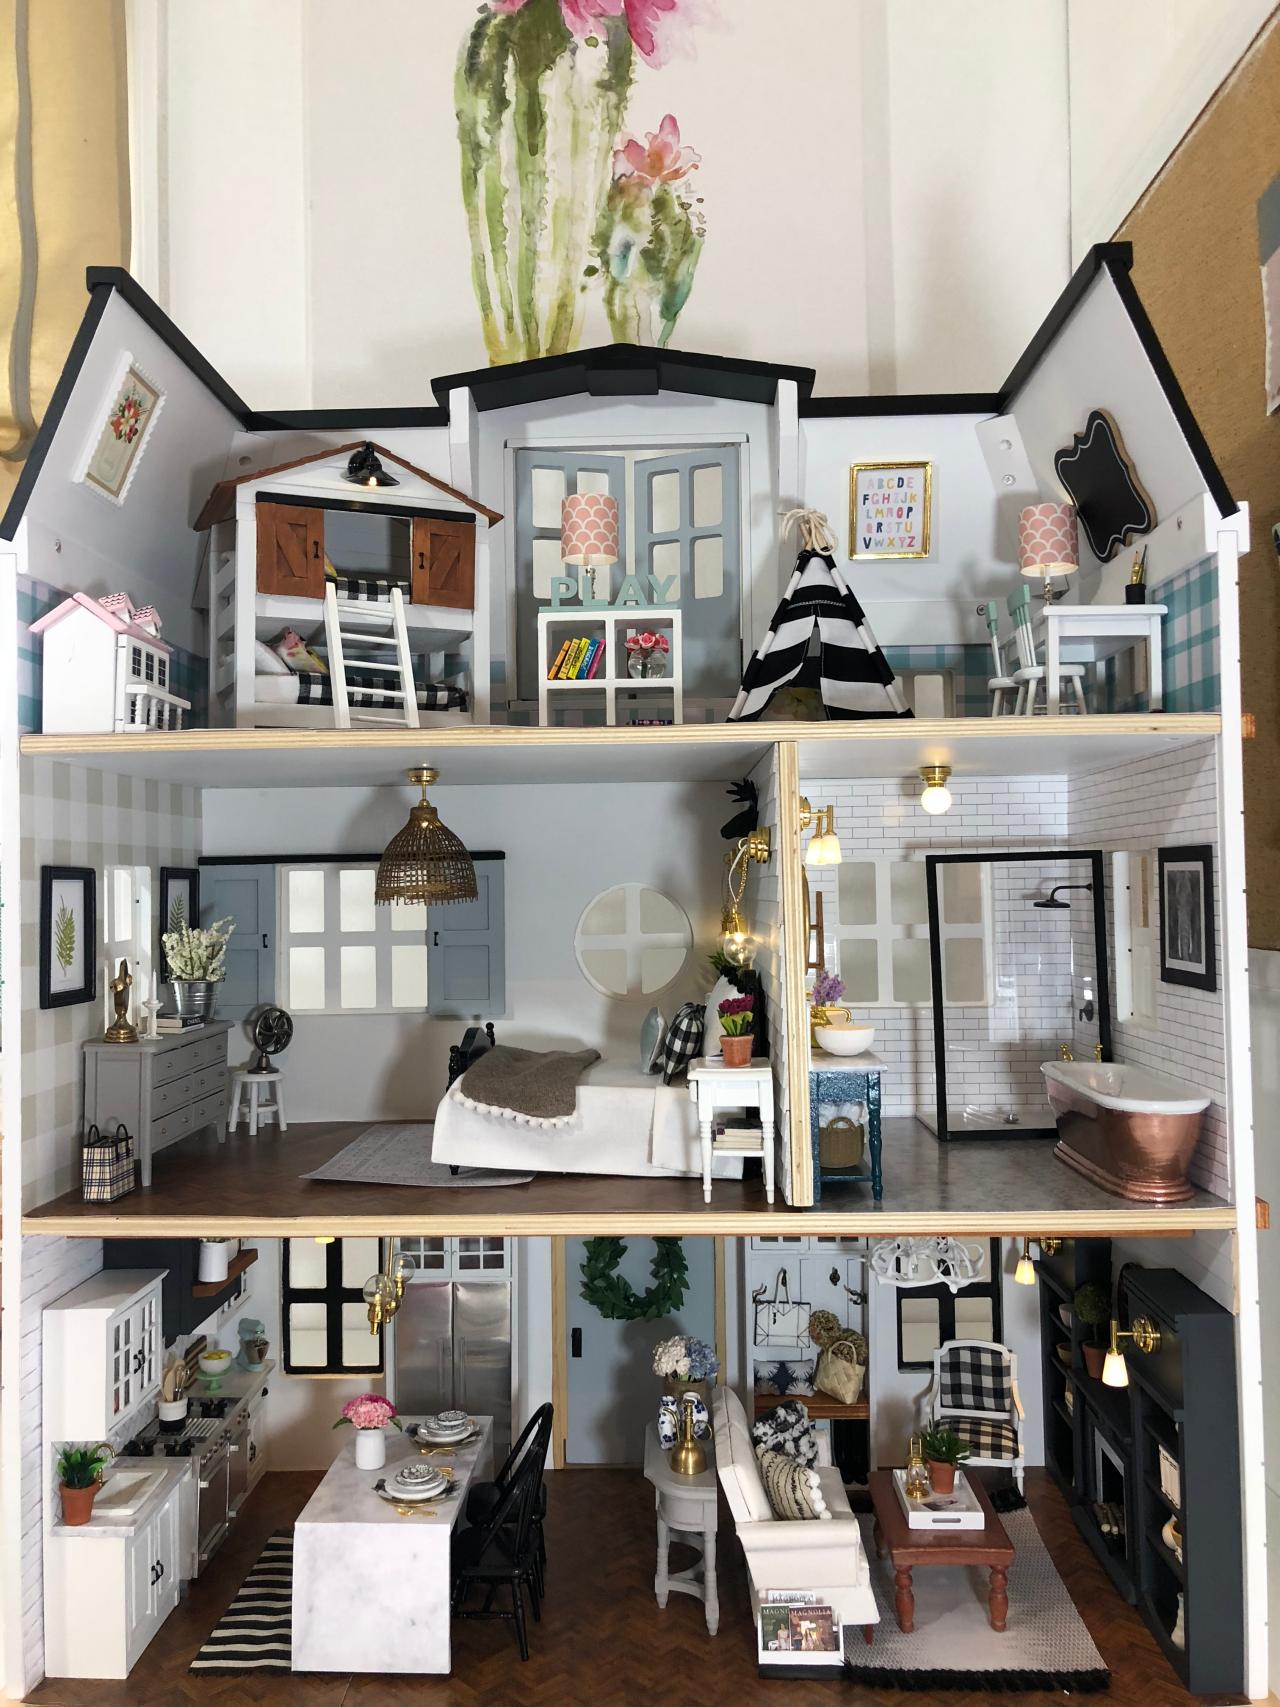 american style dolls house